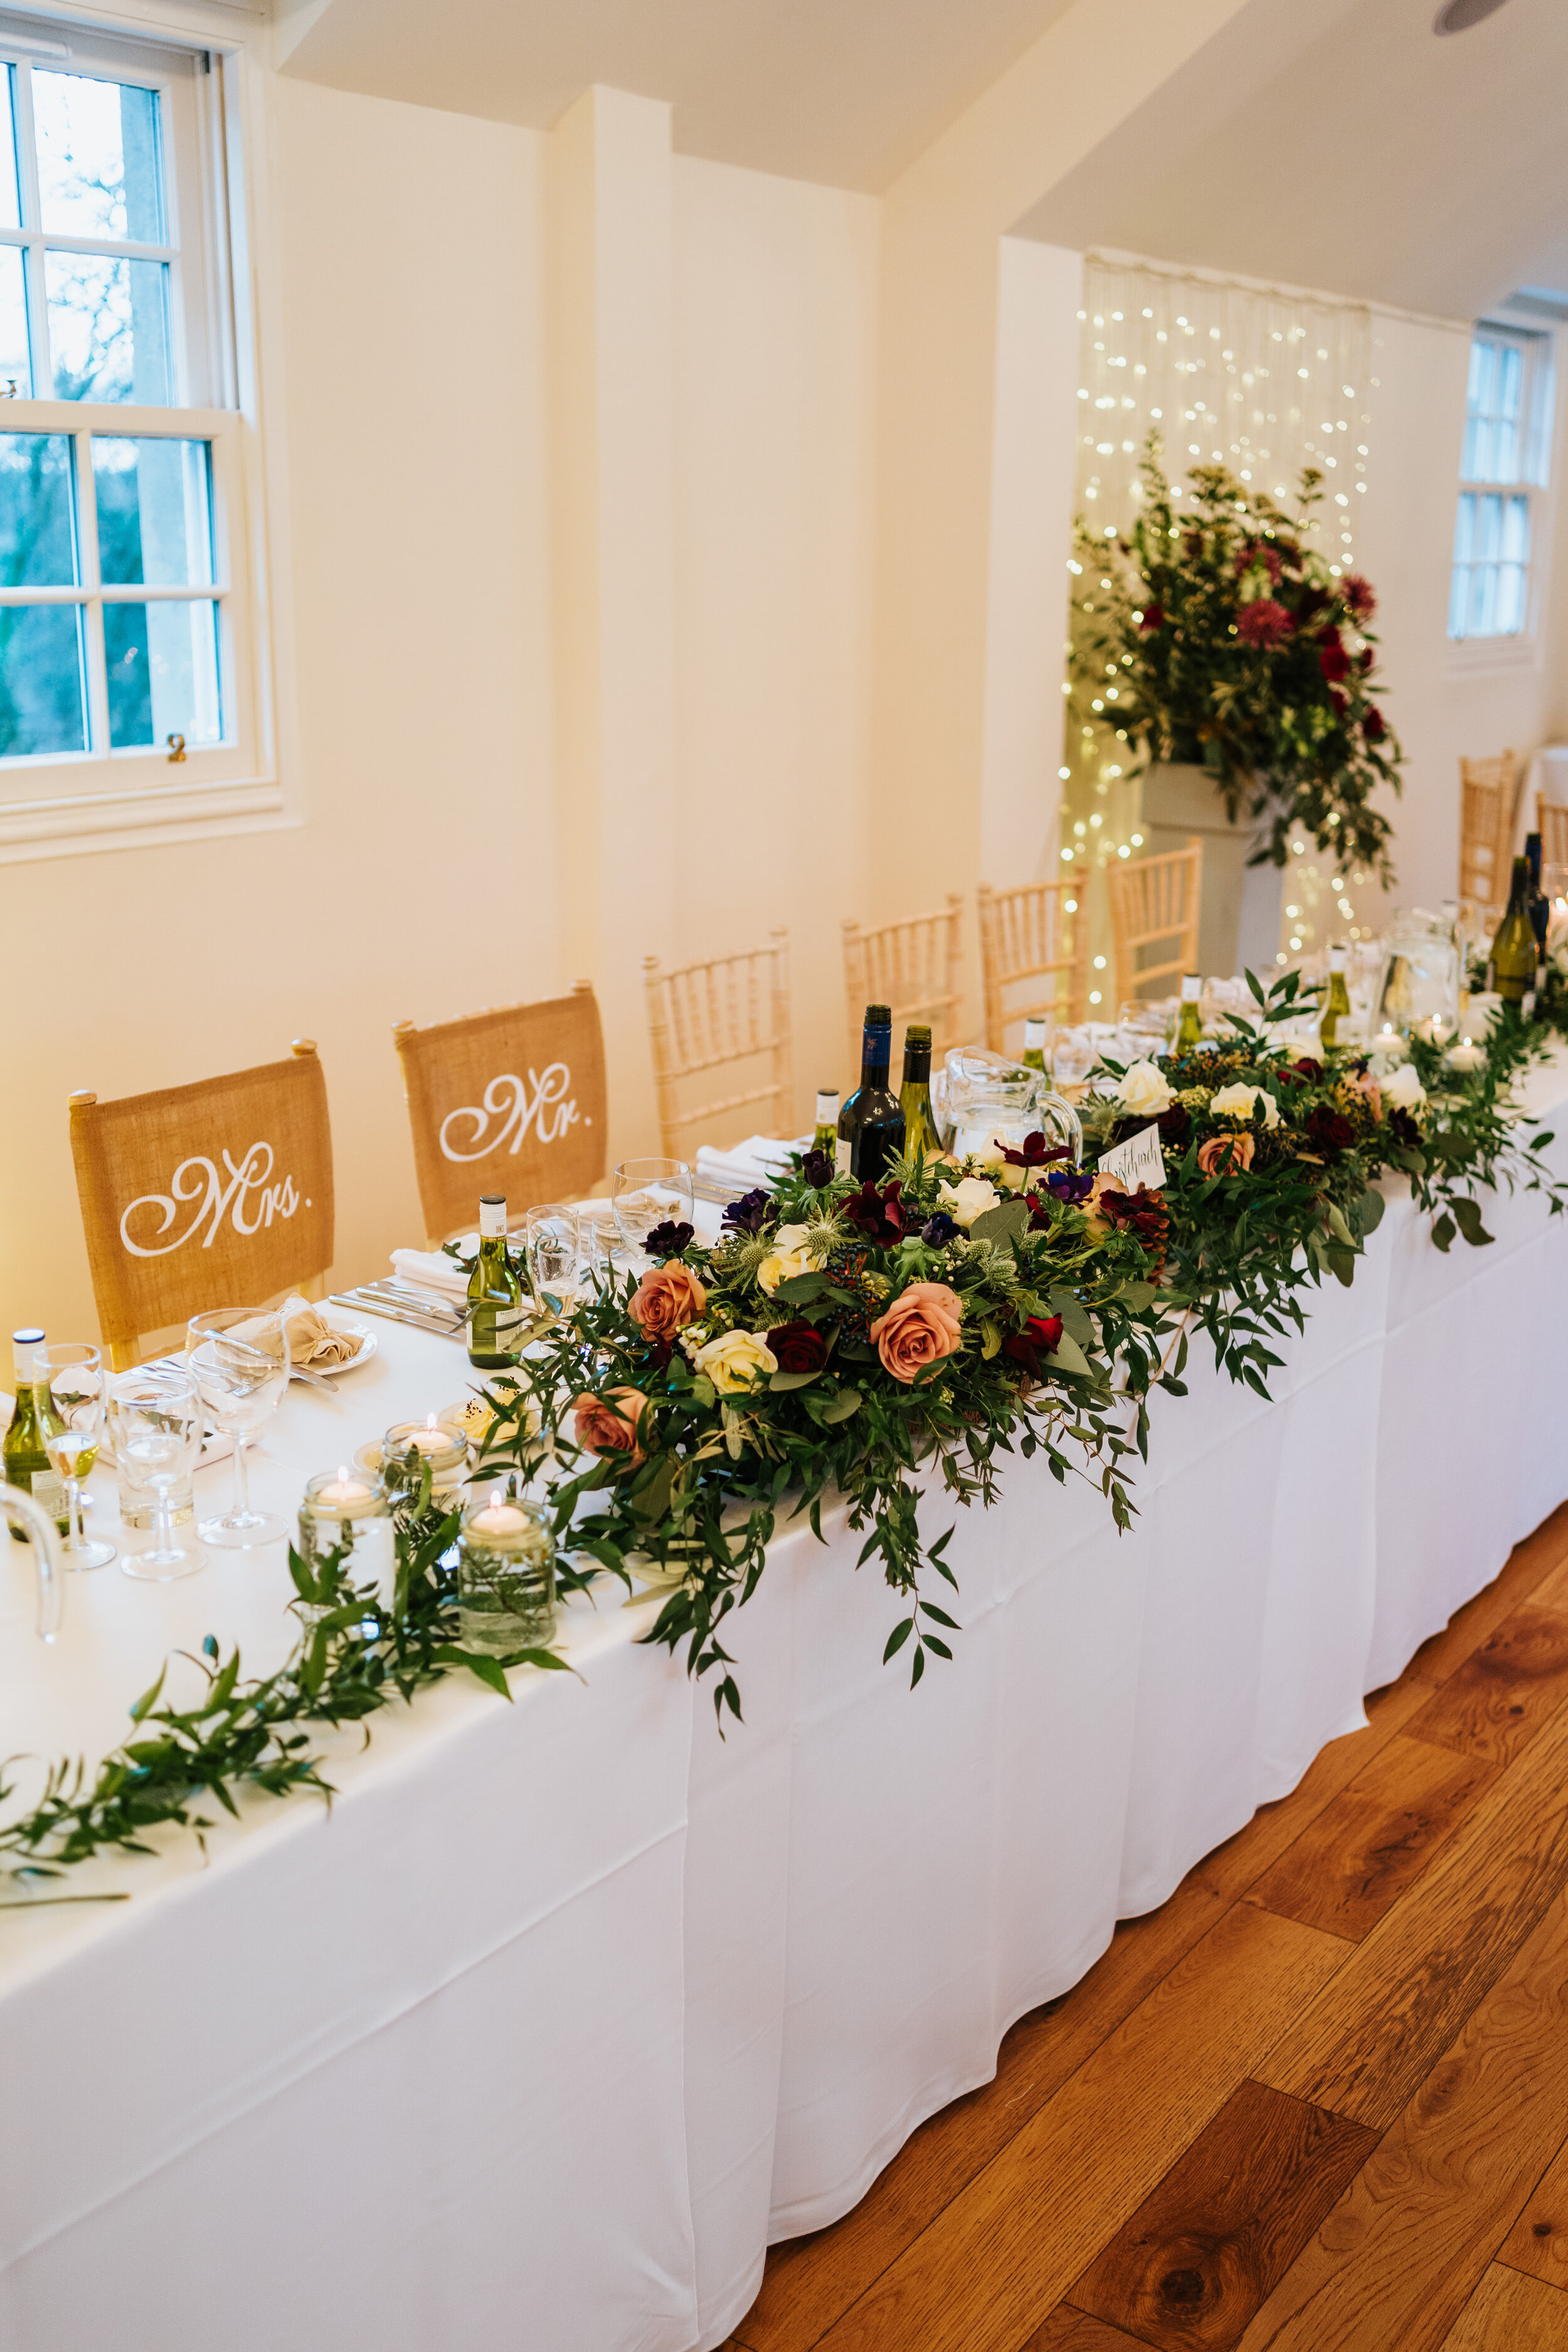 Top Table at Scottish wedding decorated with roses and foliage